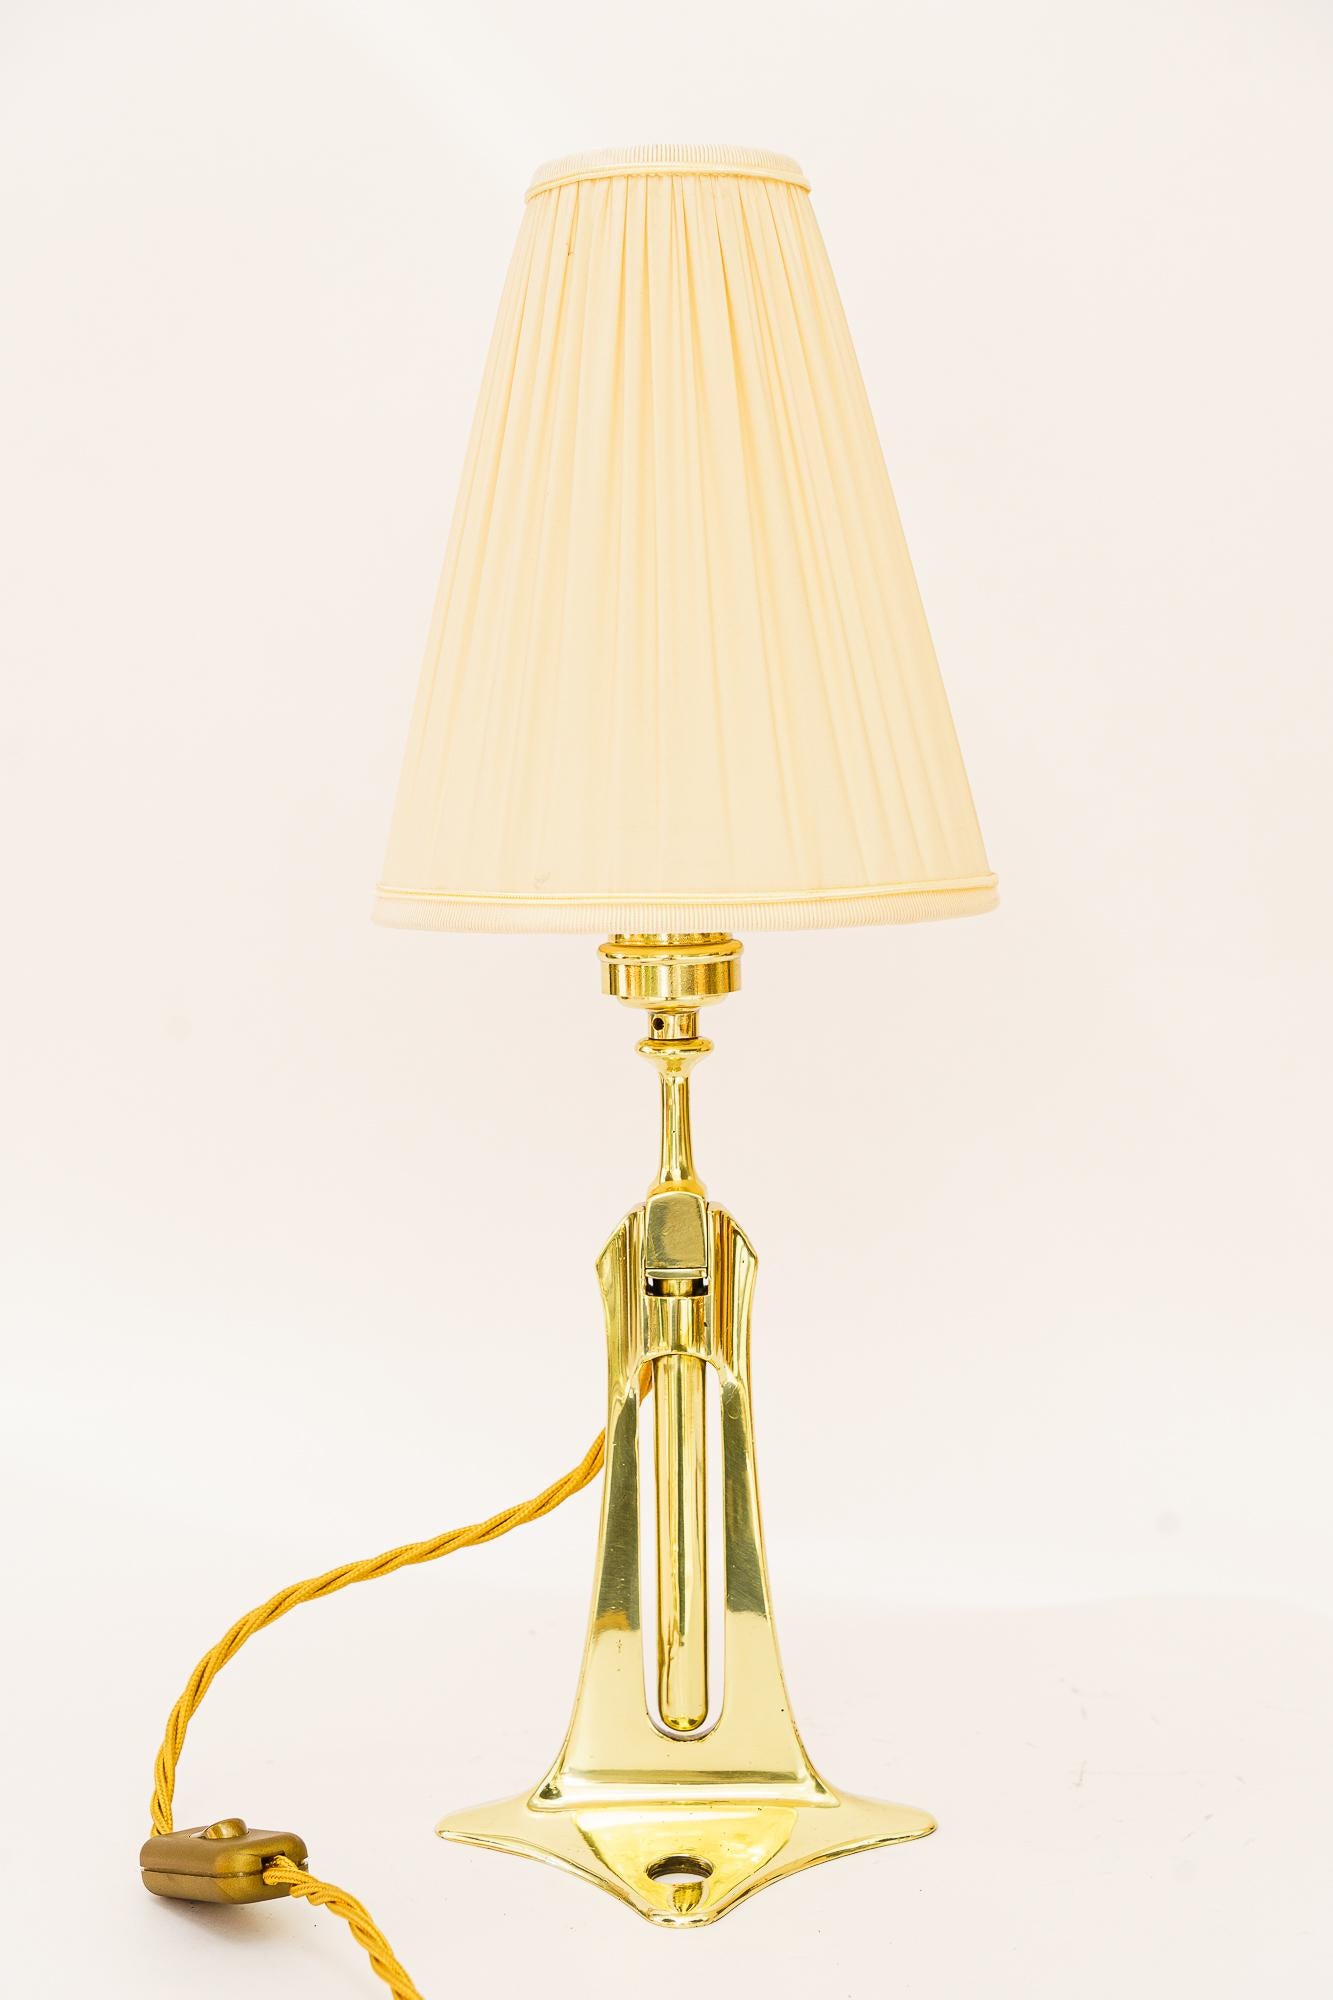 Art Deco table or wall lamp vienna around 1920s
Polished and stove enameled
The fabric is replaced ( new )
Table lamp: H: 46cm Diameter: 16cm    
Wall lamp:  H: 34cm W: 17cm D: 27cm